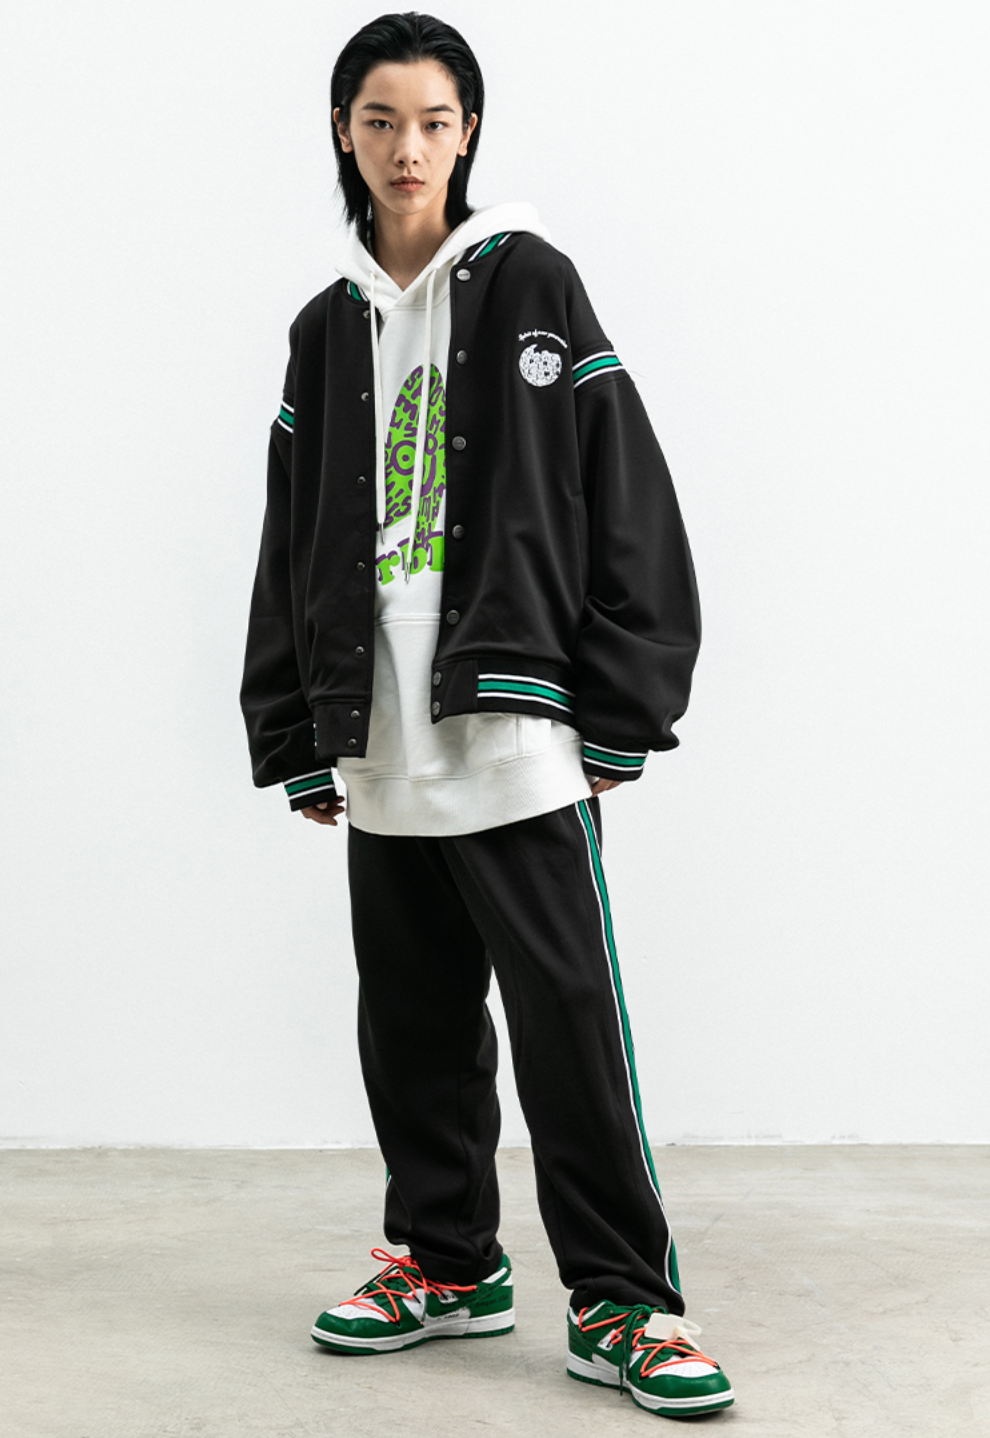 PRBLMS Earth Puzzle Baseball Jacket